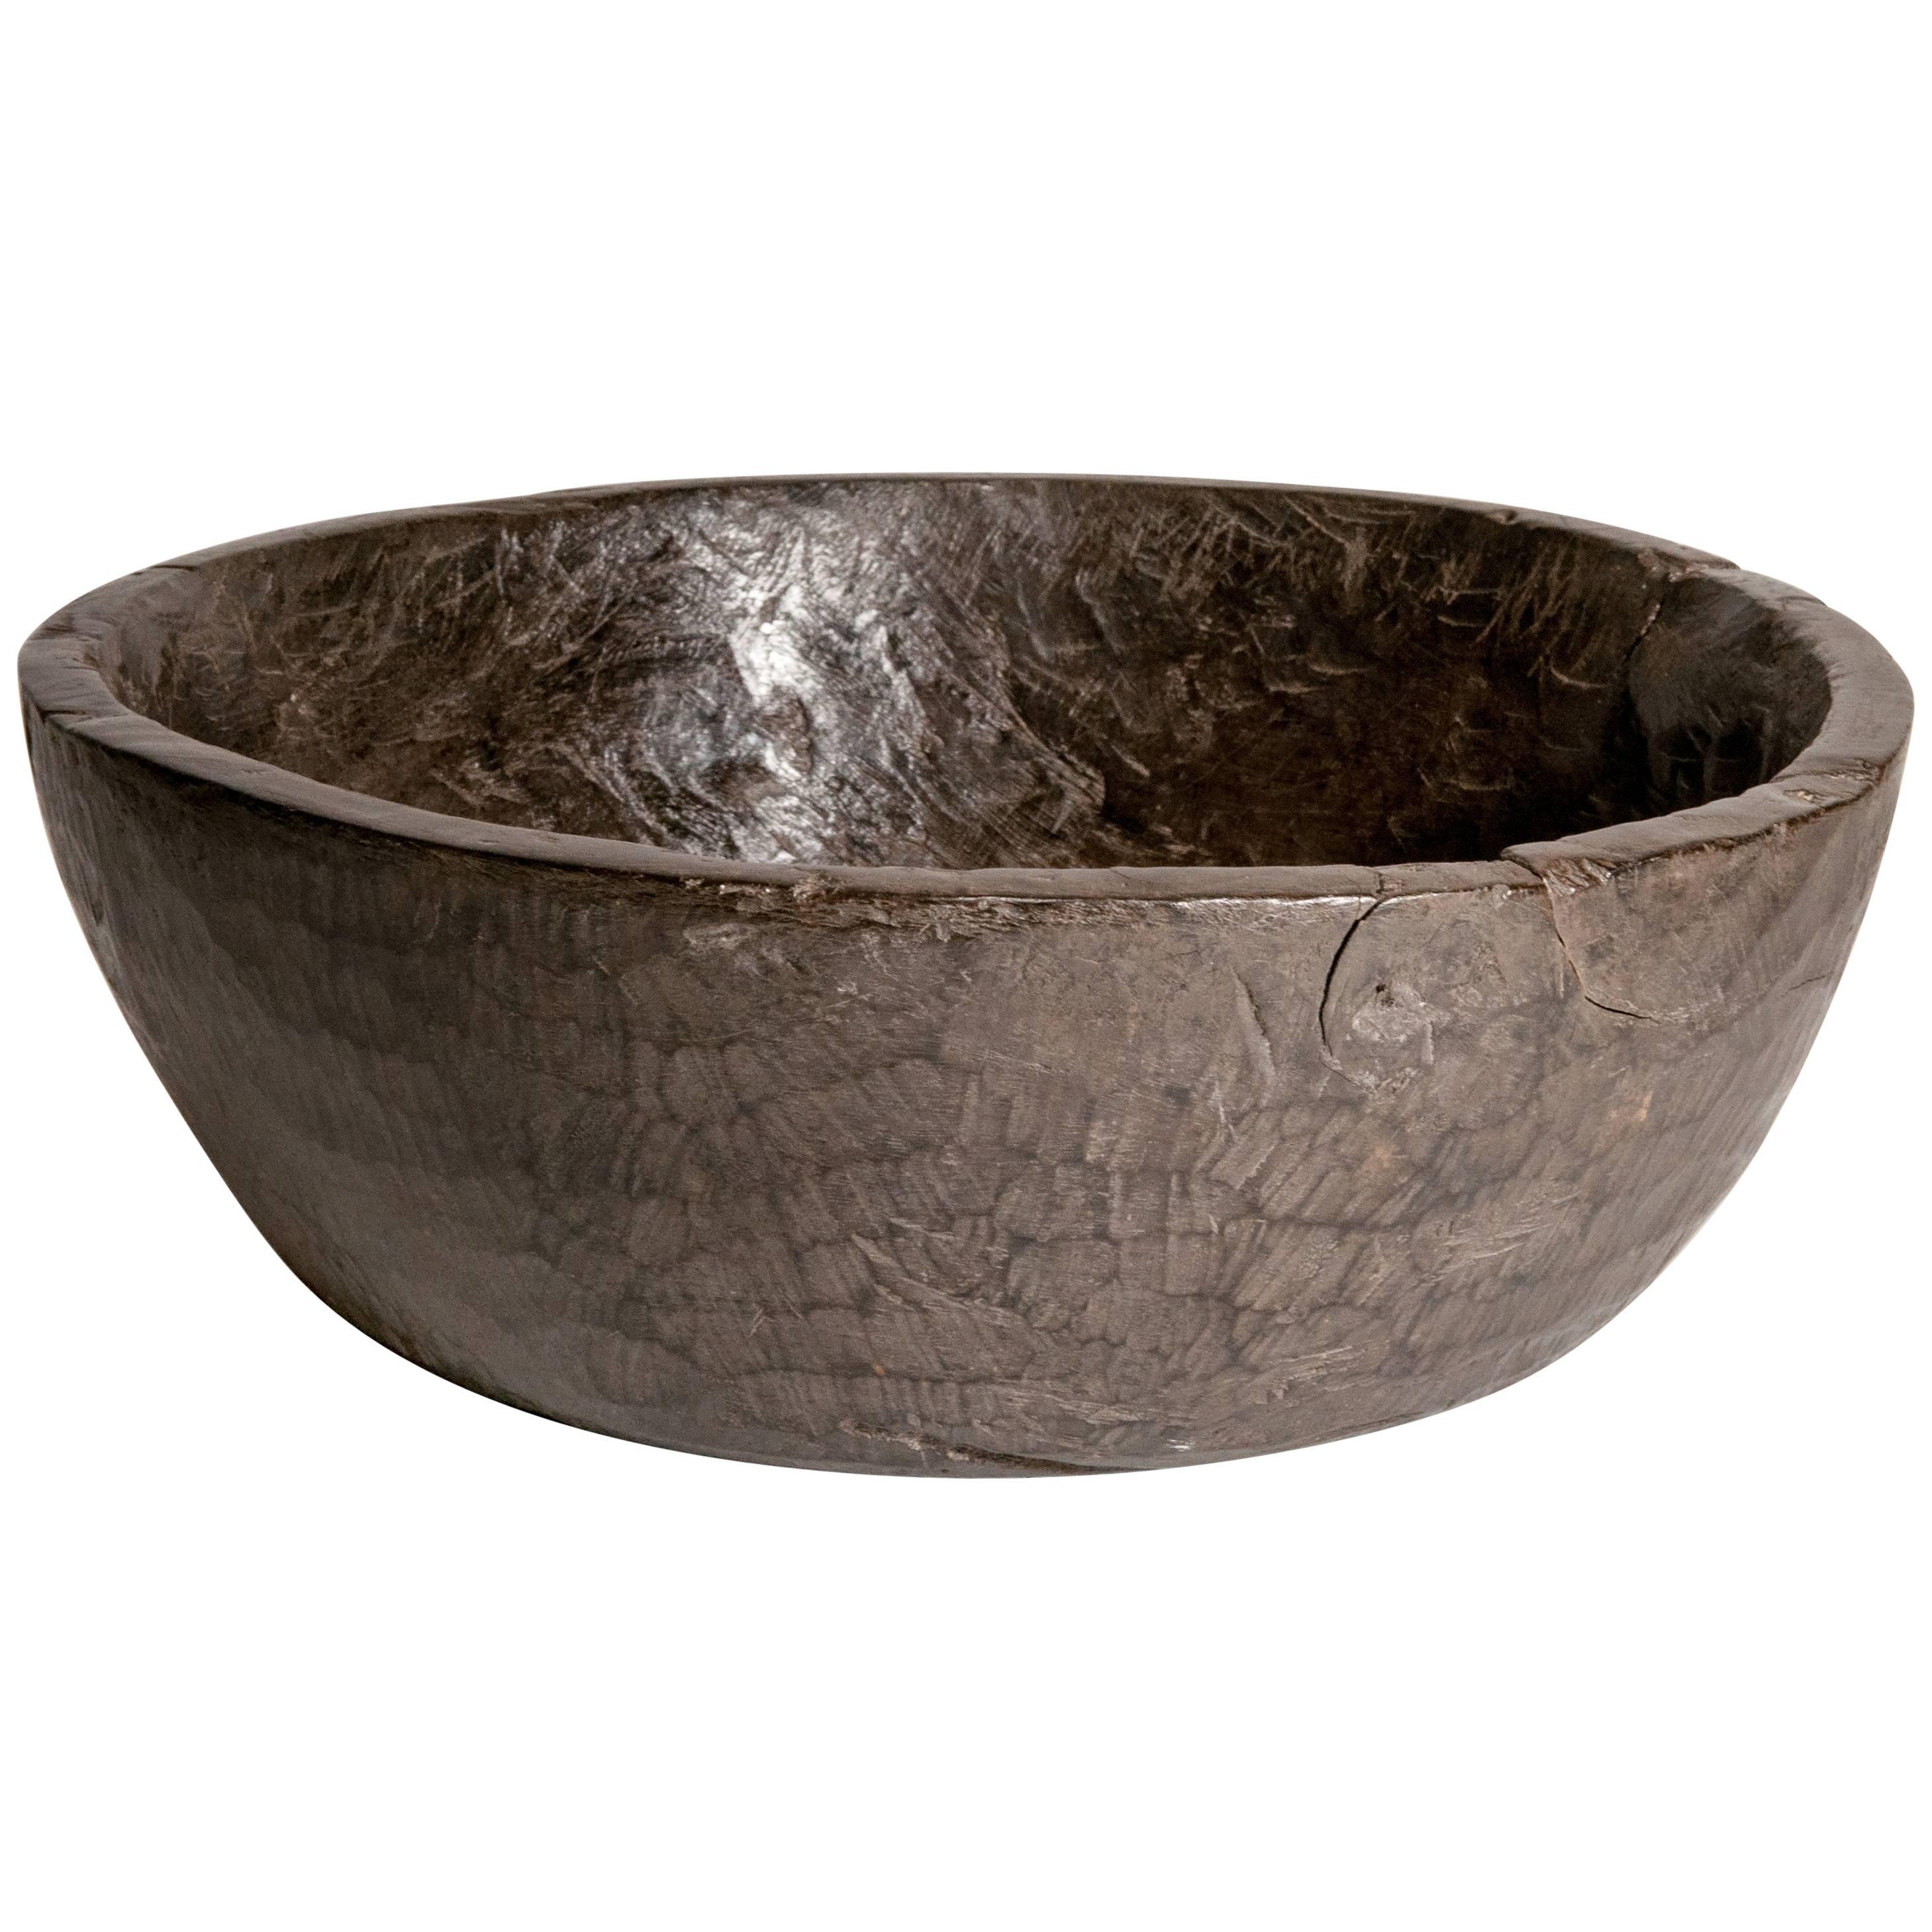 Large Tribal Ironwood Bowl from the Dayak of Borneo, Mid-20th Century